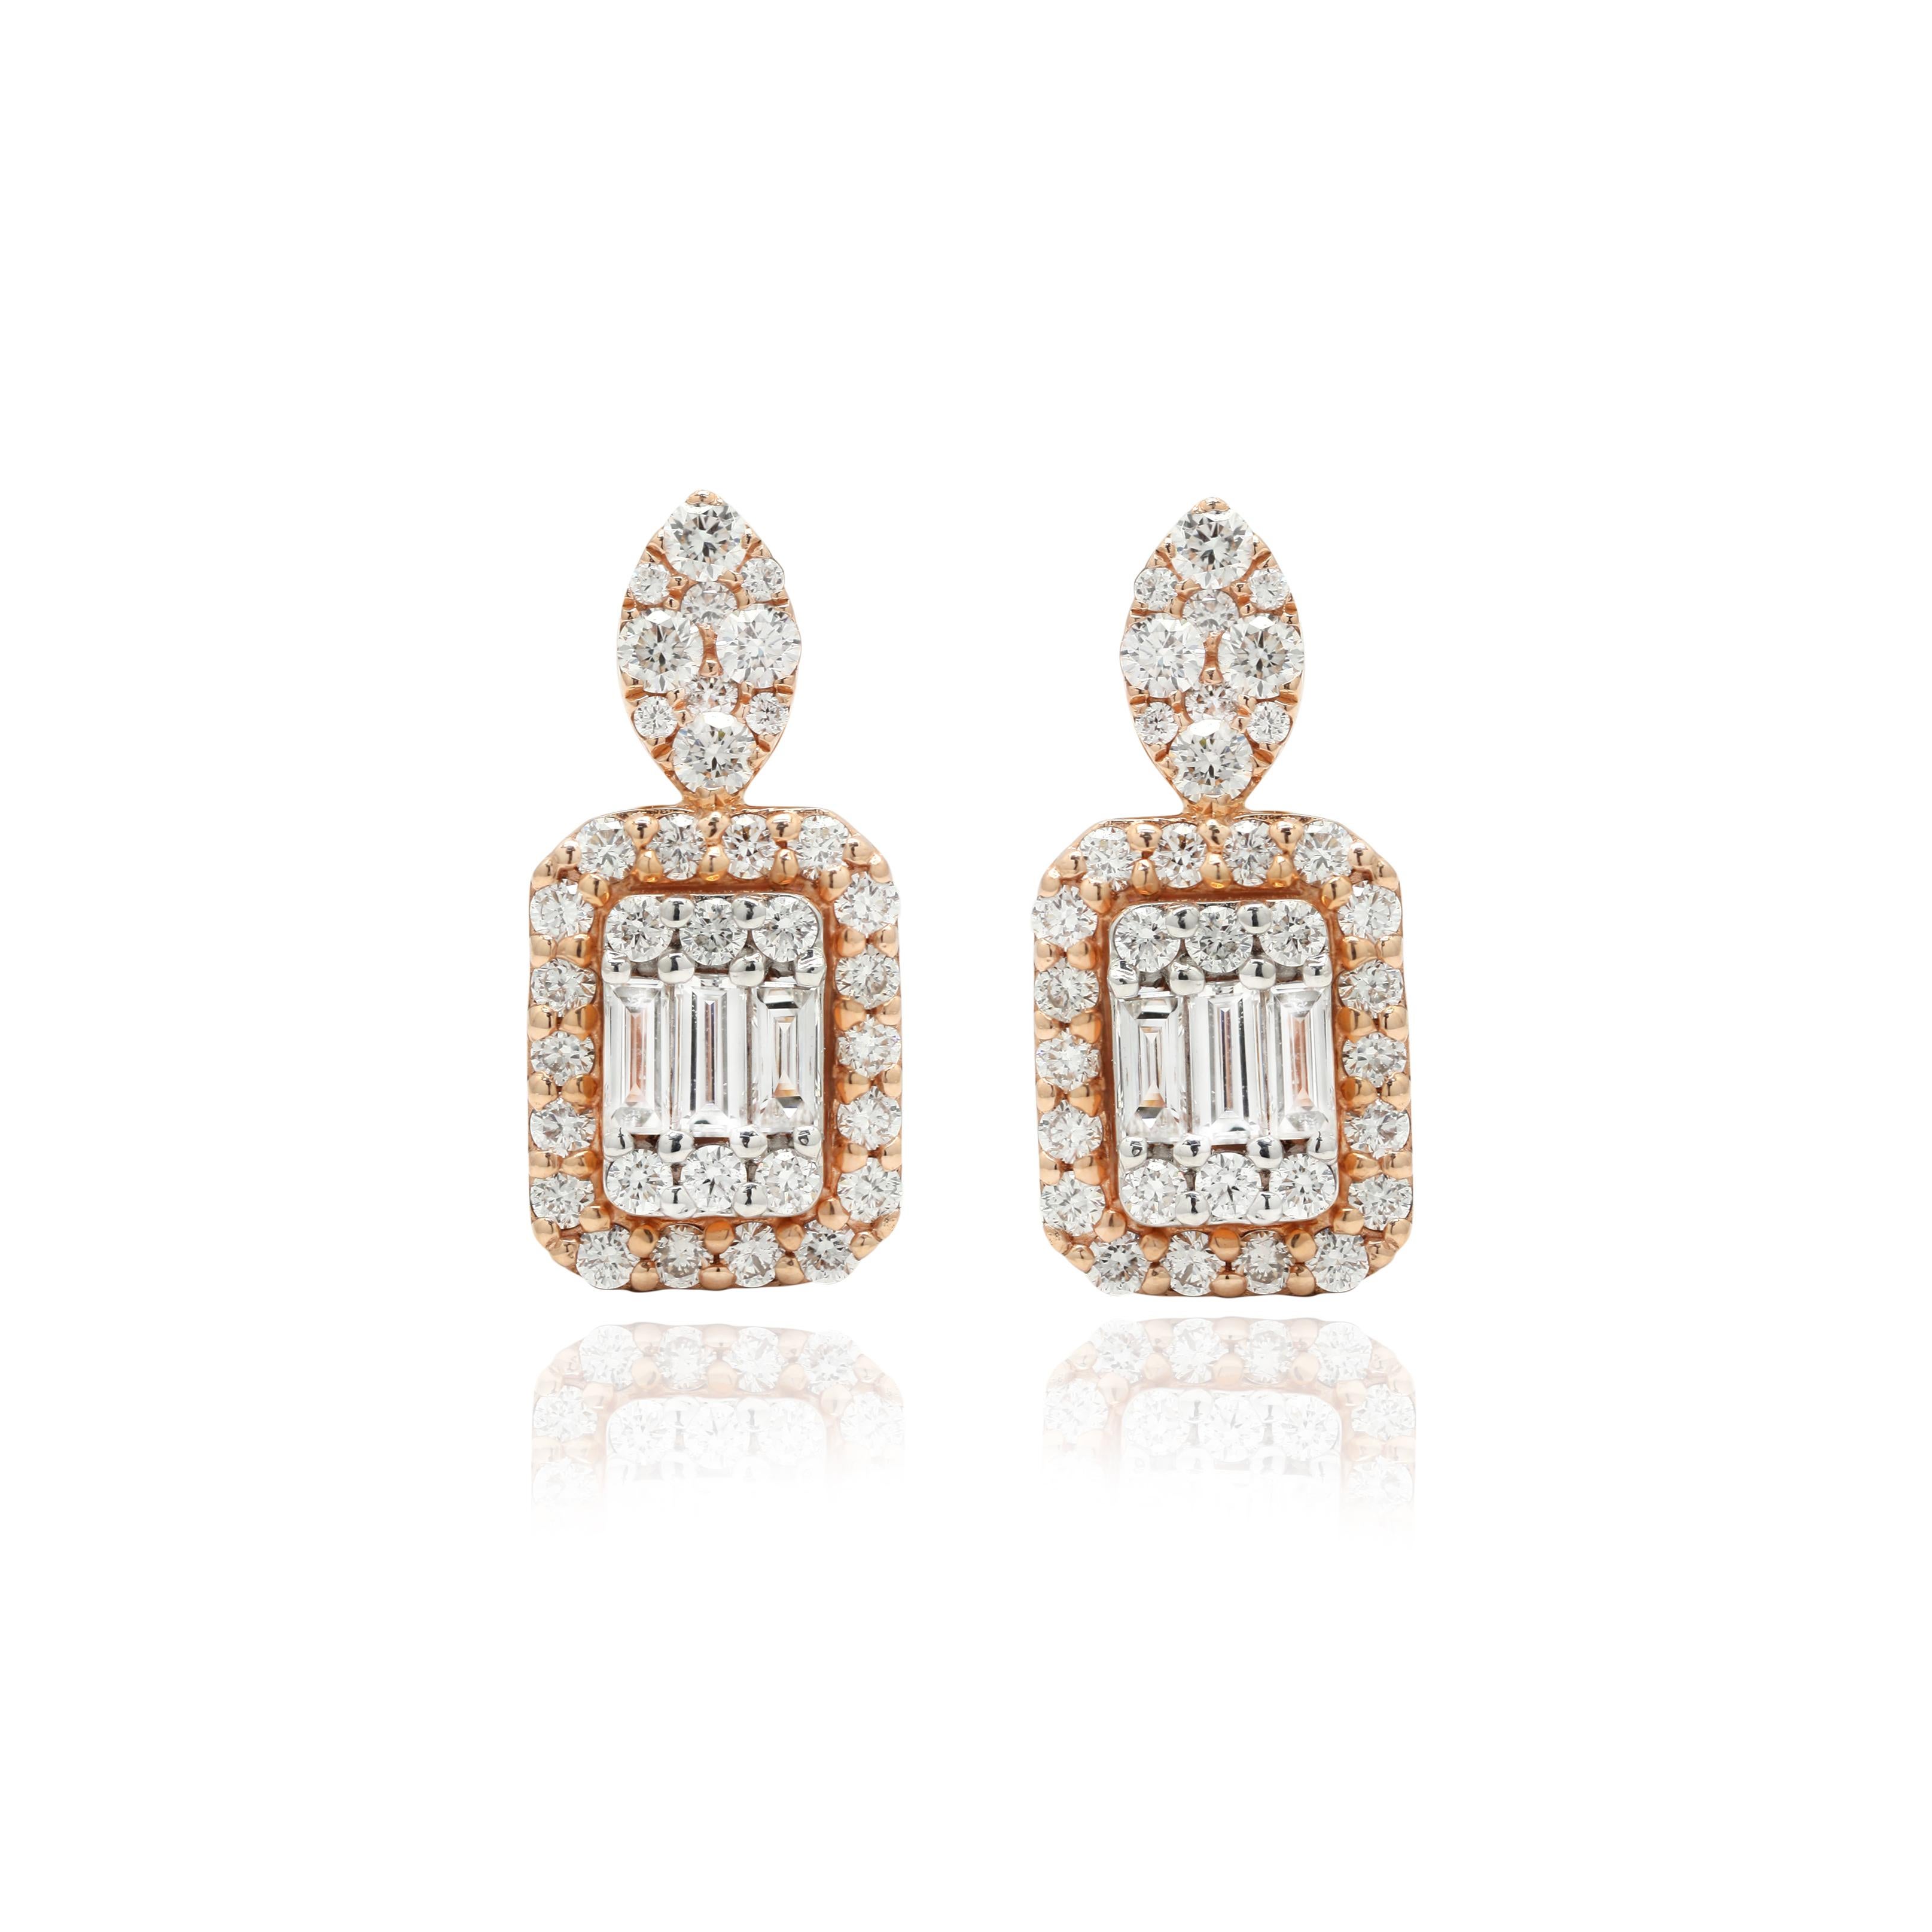 Studs create a subtle beauty while showcasing the illuminating diamonds making a statement. These gorgeous earrings will effortlessly make you stand out. 
Round Cut Diamond Stud Earrings in 14K gold. Embrace your look with these stunning pair of